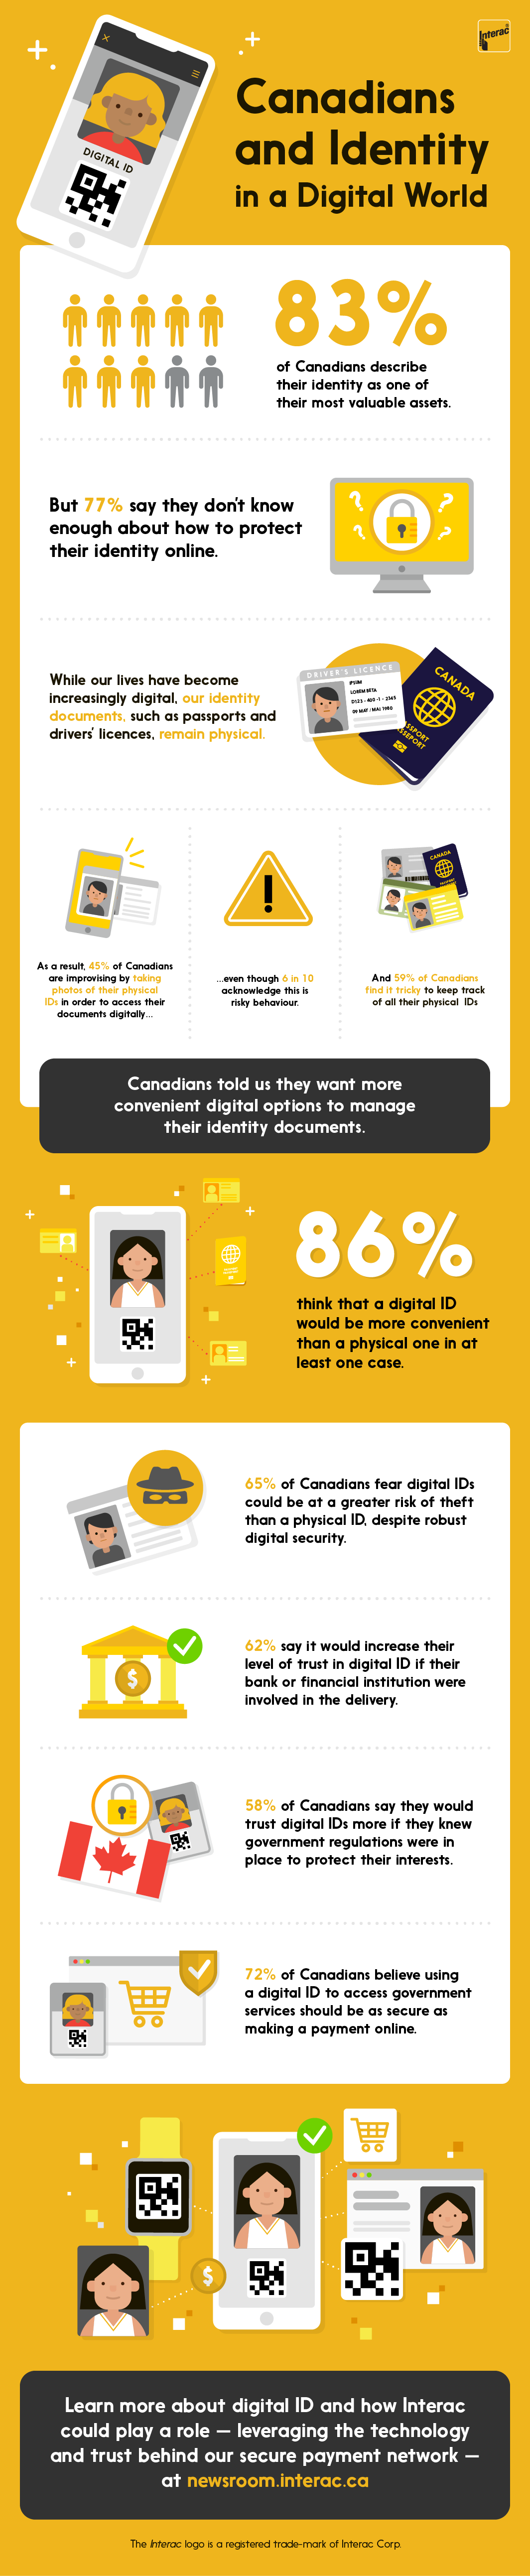 83% of Canadians describe their identity as one of their most valuable assets. But 77% say they don’t know enough about how to protect their identity online. While our lives have become increasingly digital, our identity documents, such as passports and drivers’ licenses, remain physical. As a result, 45% are improvising by taking photos of their physical IDs in order to access their documents digitally… …even though 6 in 10 acknowledge this is risky behaviour. And 59% of Canadians find it tricky to keep track of all their physical IDs Canadians told us they want more convenient digital options to manage their identity documents.   86% think that a digital ID would be more convenient than a physical one in at least one case.  65% of Canadians fear digital IDs could be at a greater risk of theft than a physical ID, despite robust security. 62% say it would increase their level of trust in digital ID if their bank or financial institution were involved in the delivery. 58% of Canadians say they would trust digital IDs more if they knew government regulations were in place to protect their interests. 72% of Canadians believe using a digital ID to access government services should be as secure as making a payment online. Learn more about digital ID and how Interac could play a role – leveraging the technology and trust behind our secure payment network – at newsroom.interac.ca